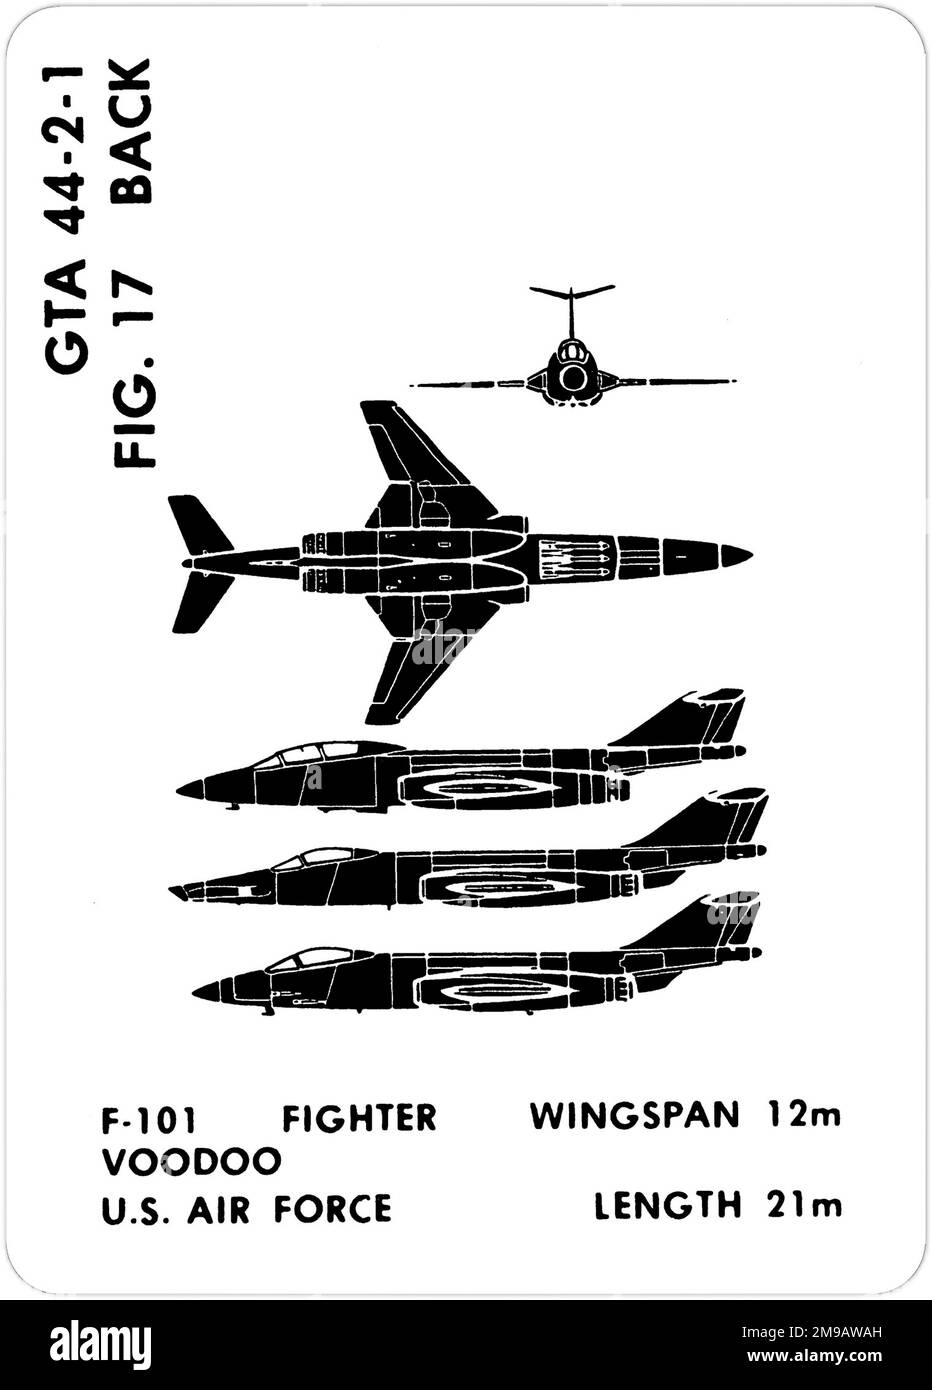 McDonnell RF-101C - F-101A - F-101C Voodoo. This is one of the series of Graphics Training Aids (GTA) used by the United States Army to train their personnel to recognize friendly and hostile aircraft. This particular set, GTA 44-2-1, was issued in July1977. The set features aircraft from: Canada, Italy, United Kingdom, United States, and the USSR. Stock Photo